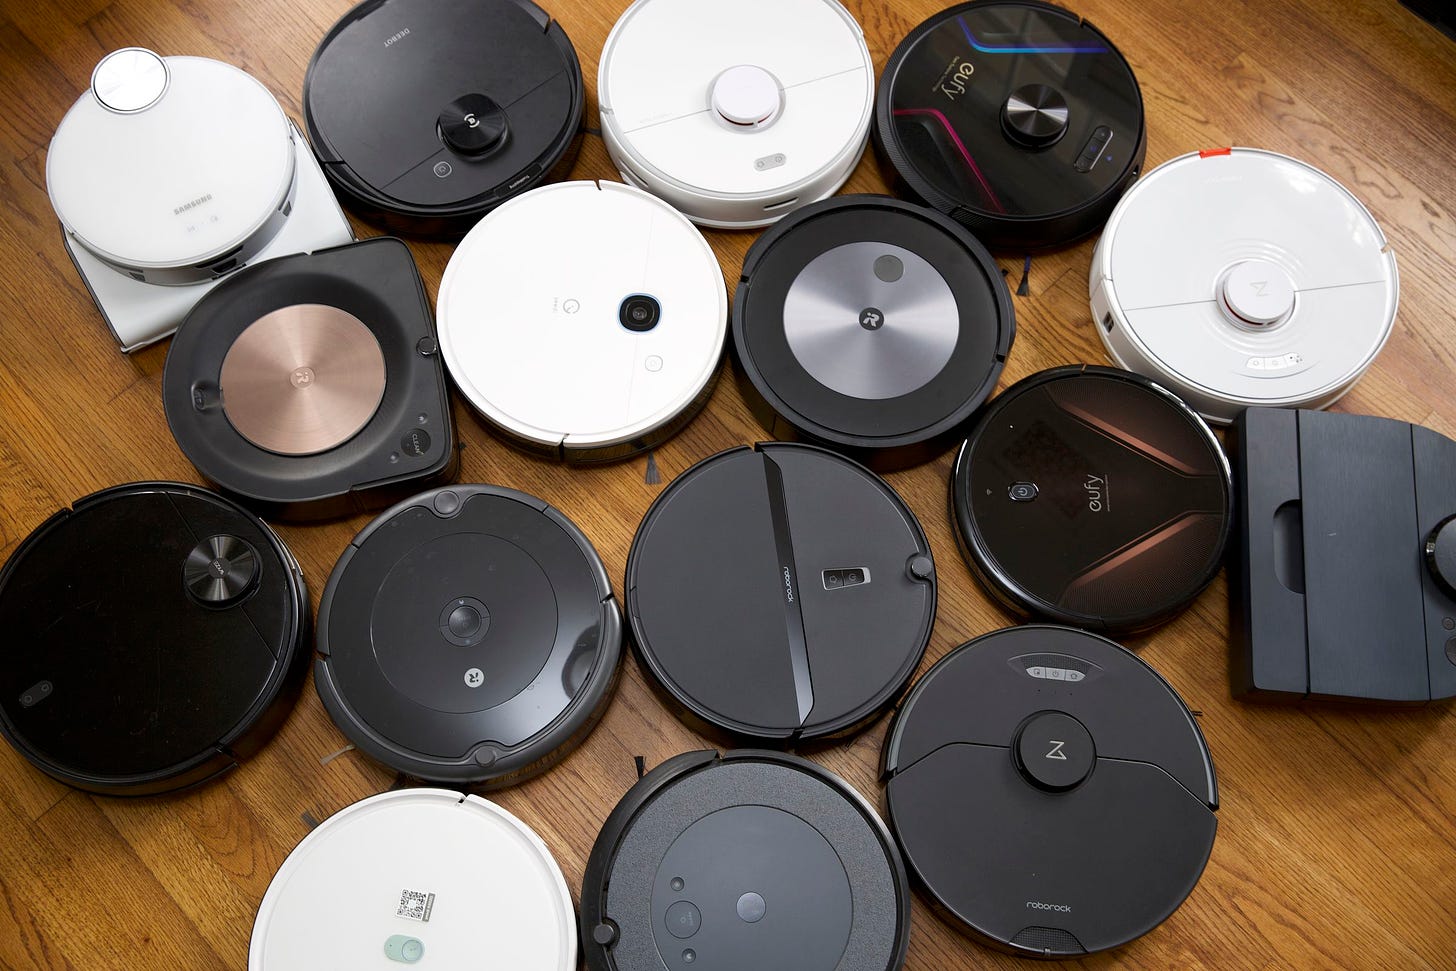 There are a lot of robot vacuums available today, and I’ve tested most of them.